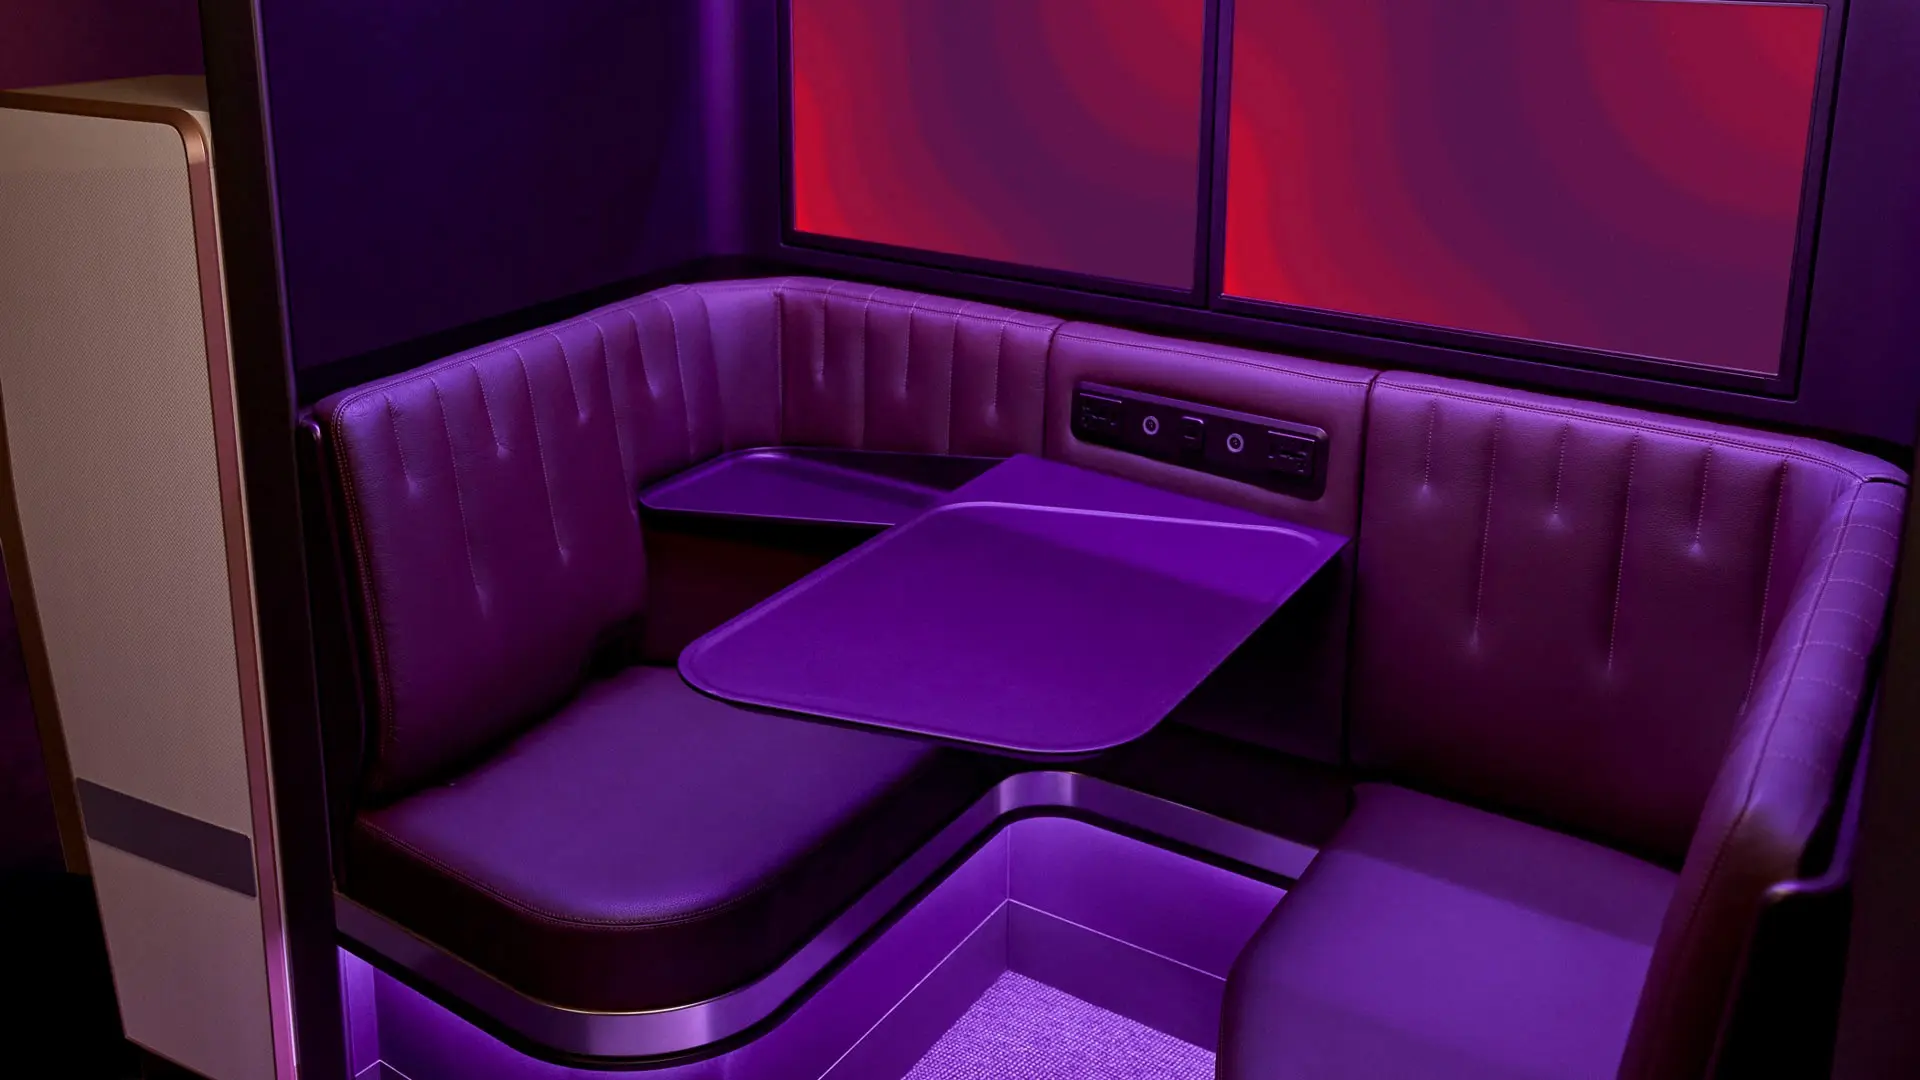 Airlines Articles - Virgin Atlantic introduces The Booth to its Upper Class experience